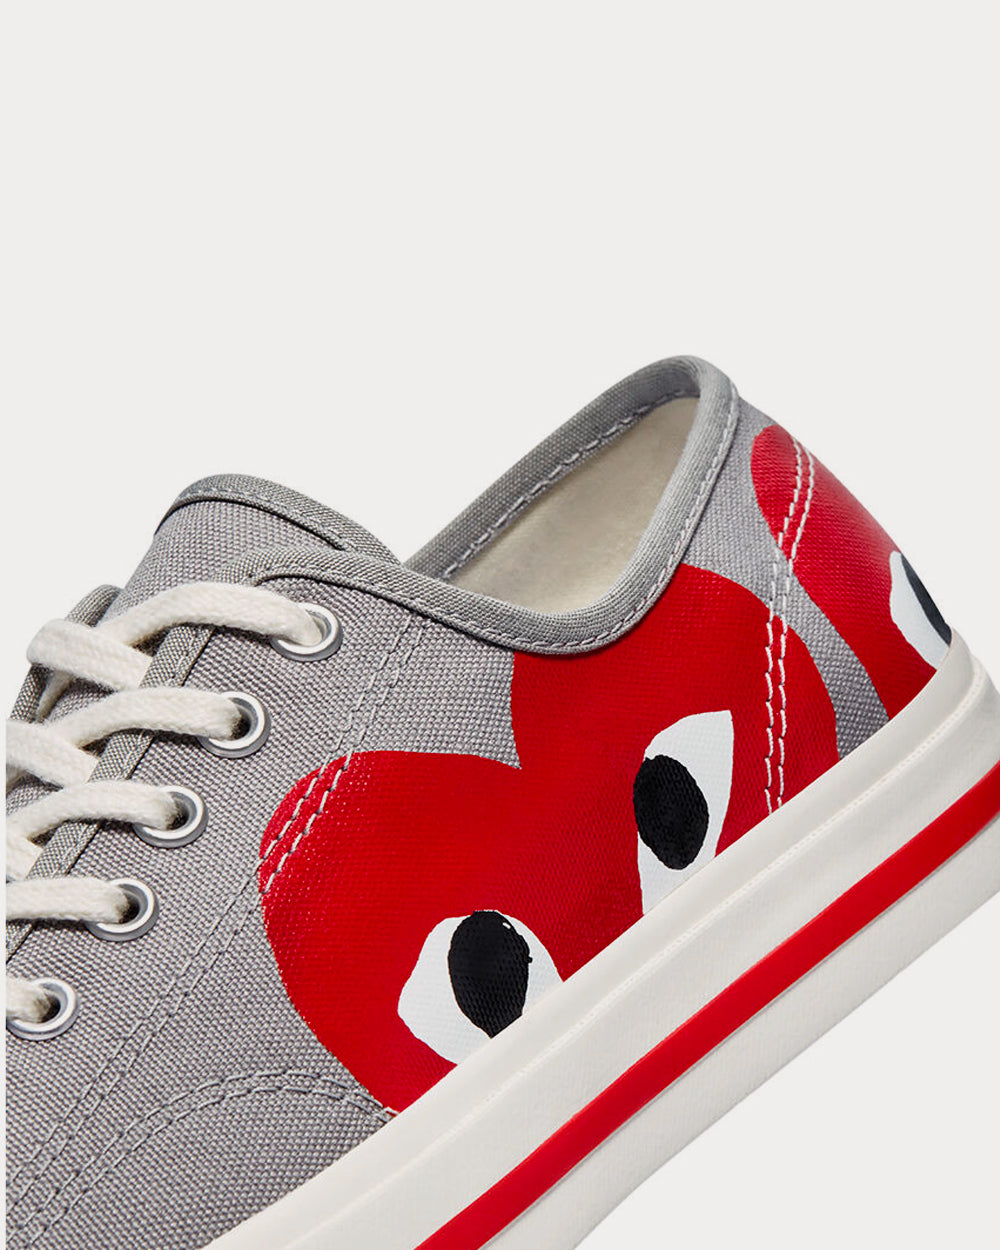 Converse x Comme des Garçons PLAY - Jack Purcell Drizzle / Egret / Red Low Top Sneakers